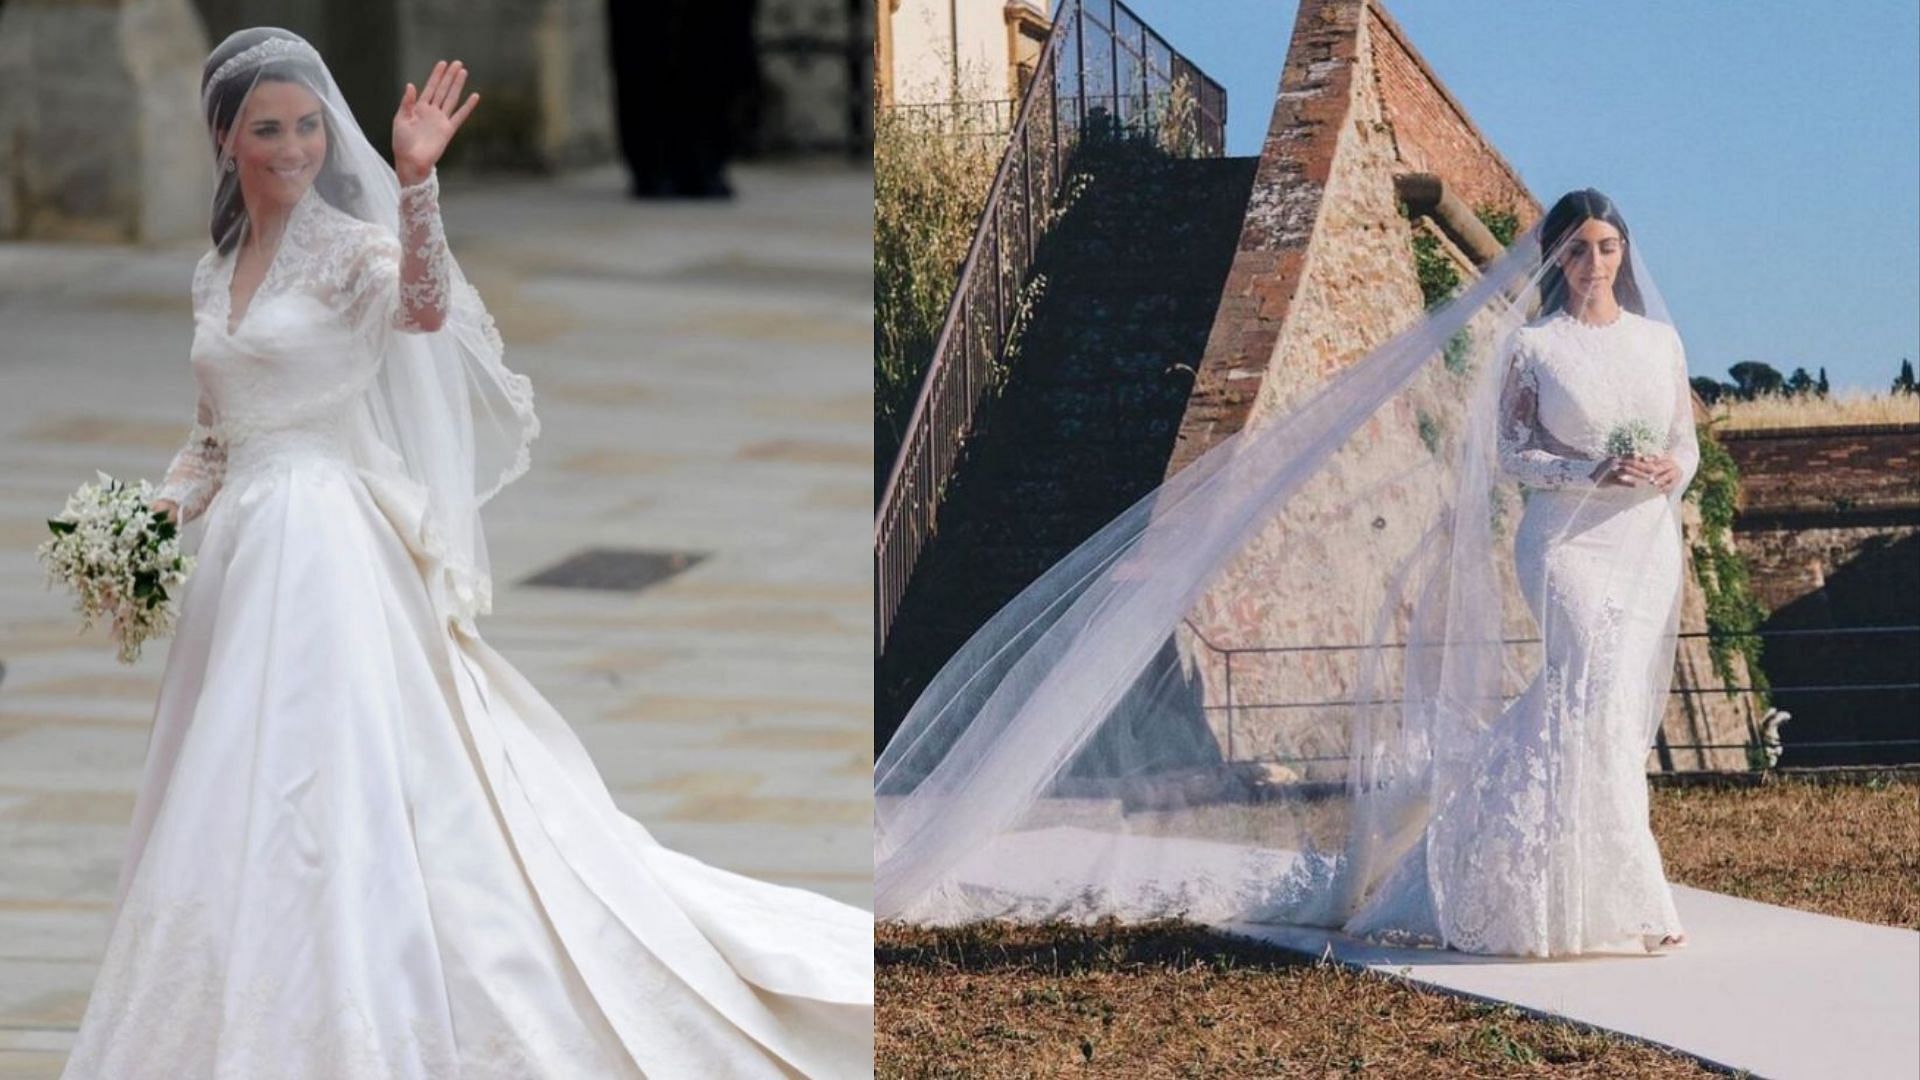 Wedding dresses can be insanely expensive (Image via theduchesskate and bensimon/Instagram)